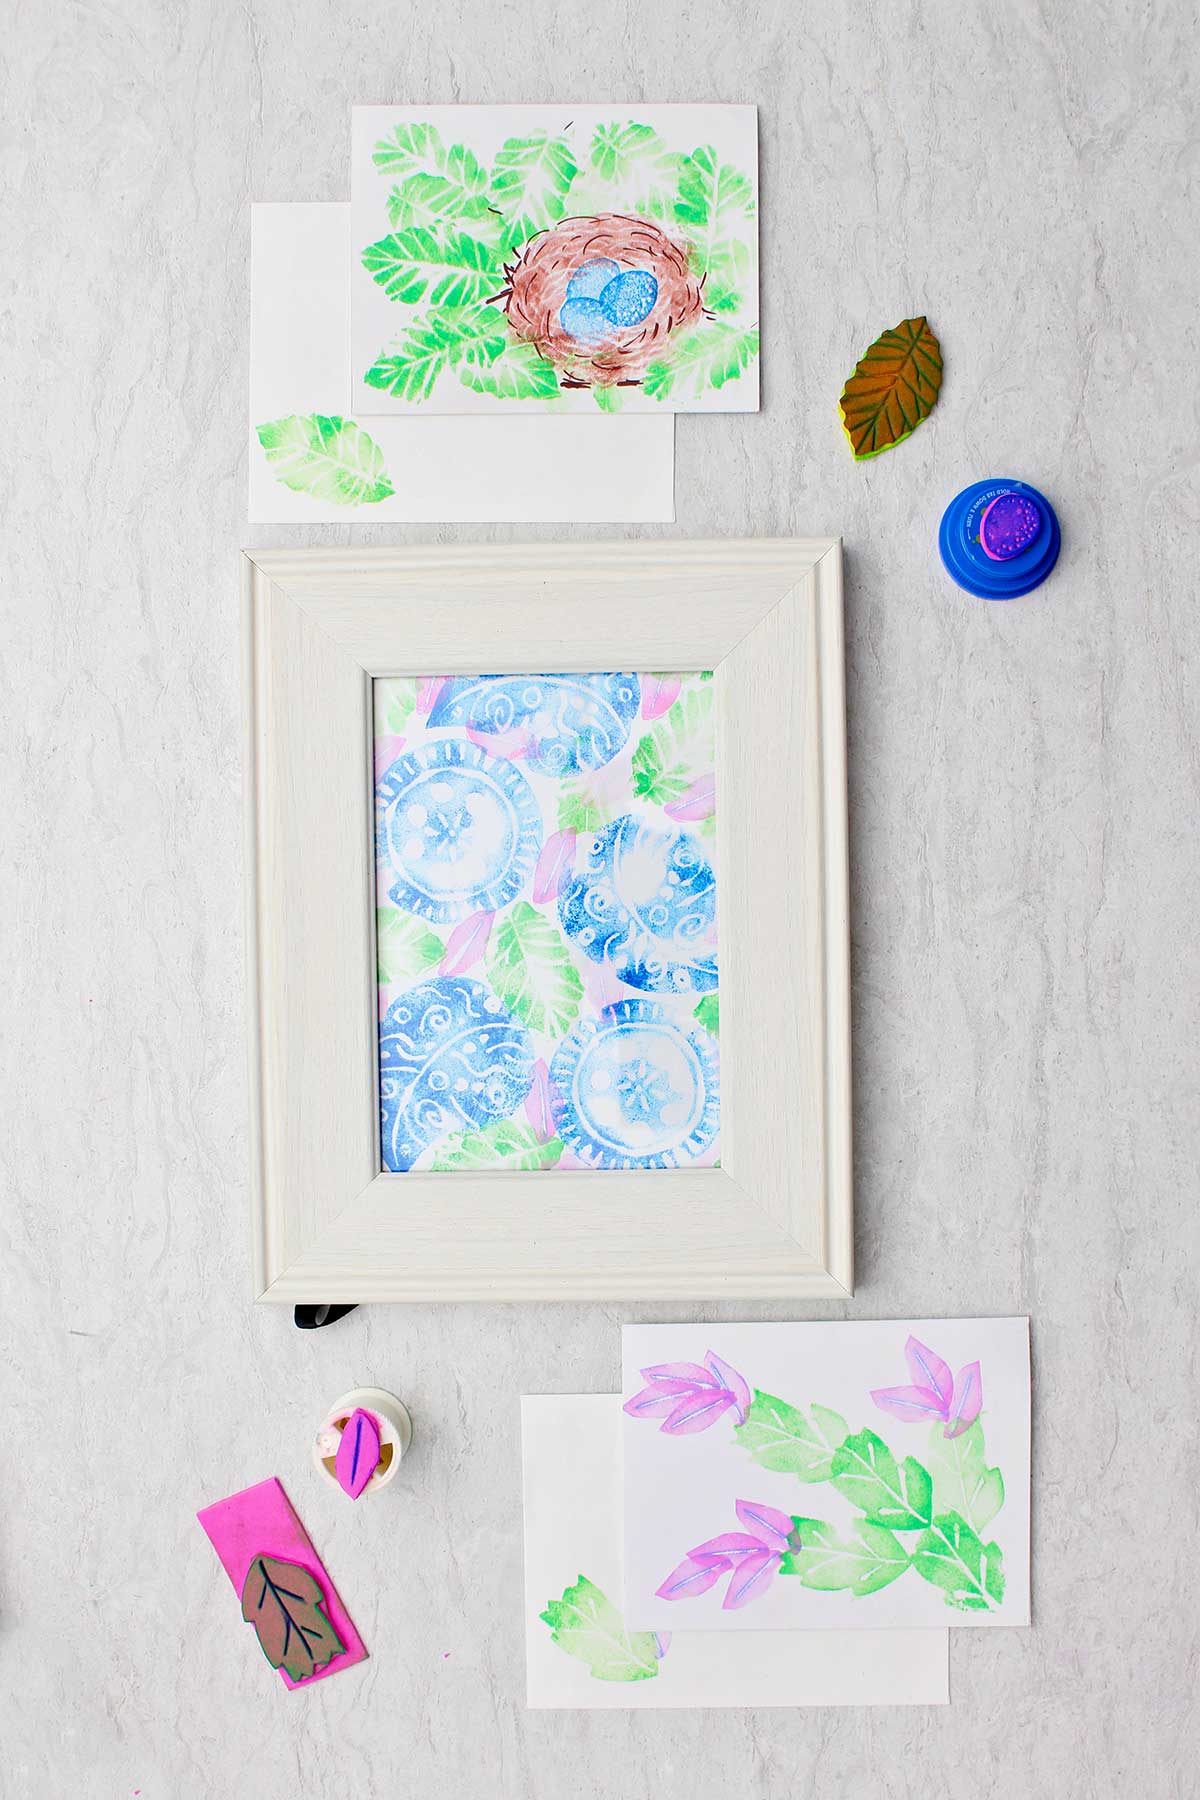 Finished prints made with craft foam stamps, center print is in white frame.